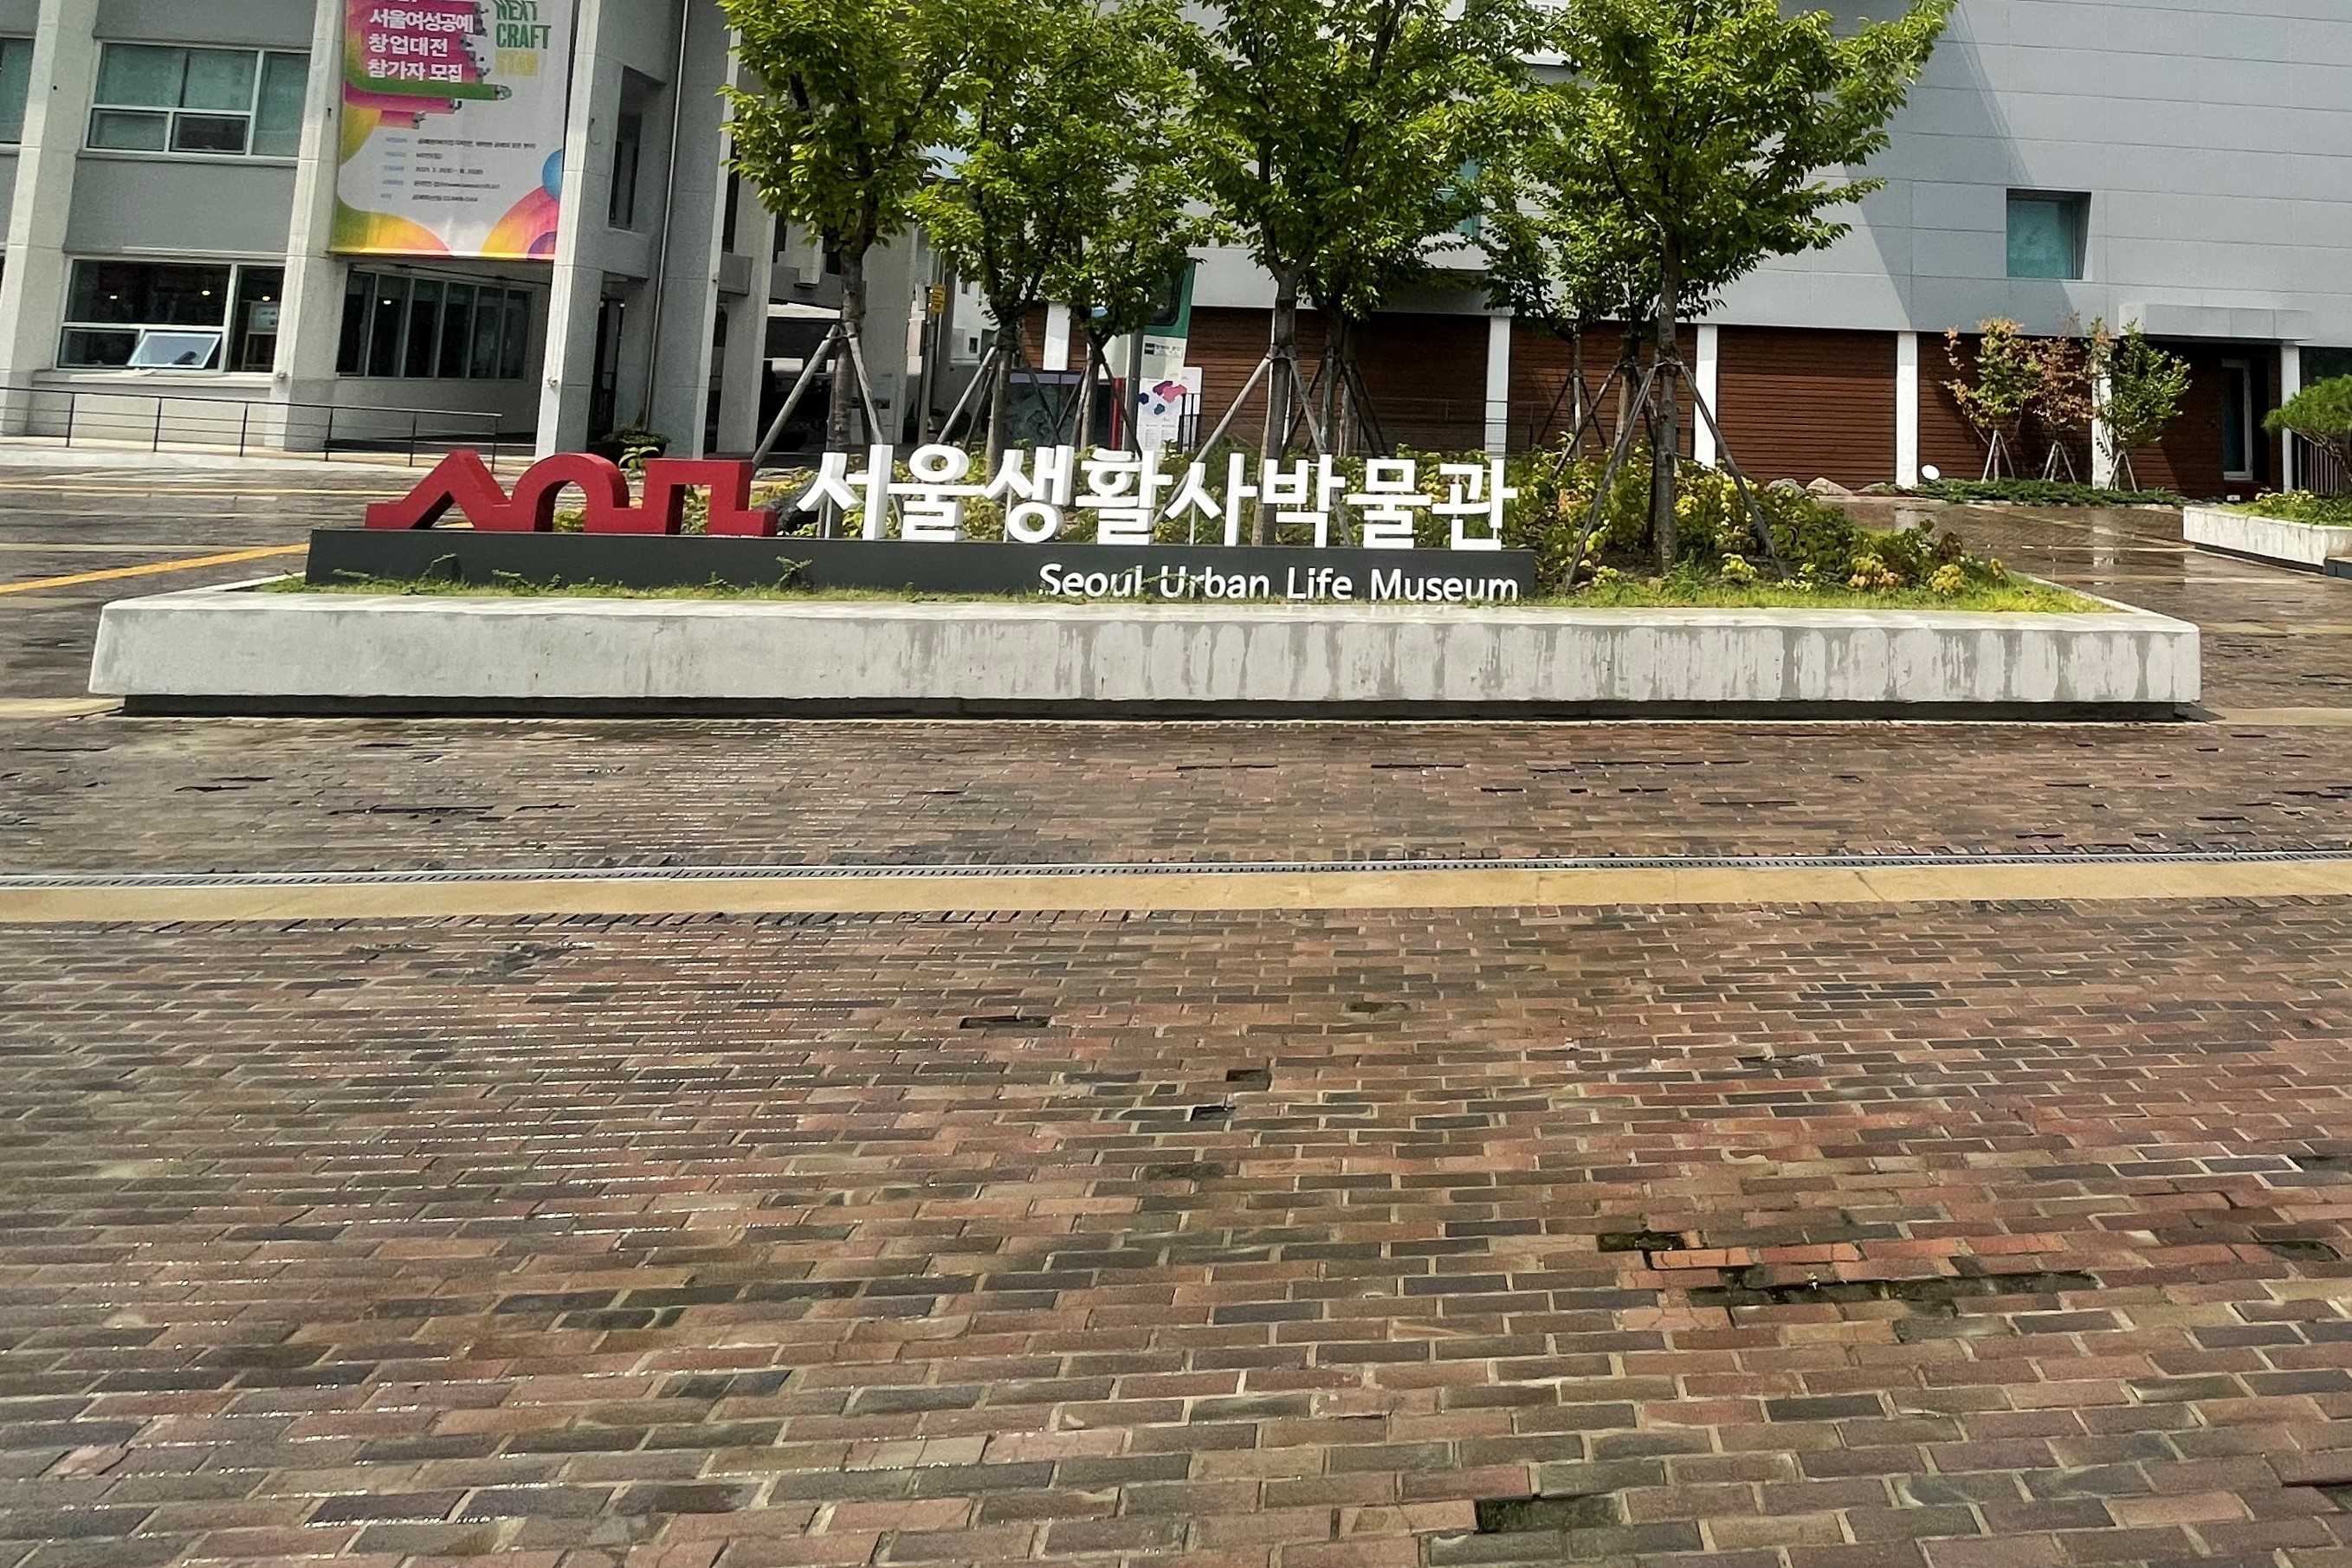 Entryway/ Main entrance 0 : The signboard of museum installed on the red brick road
